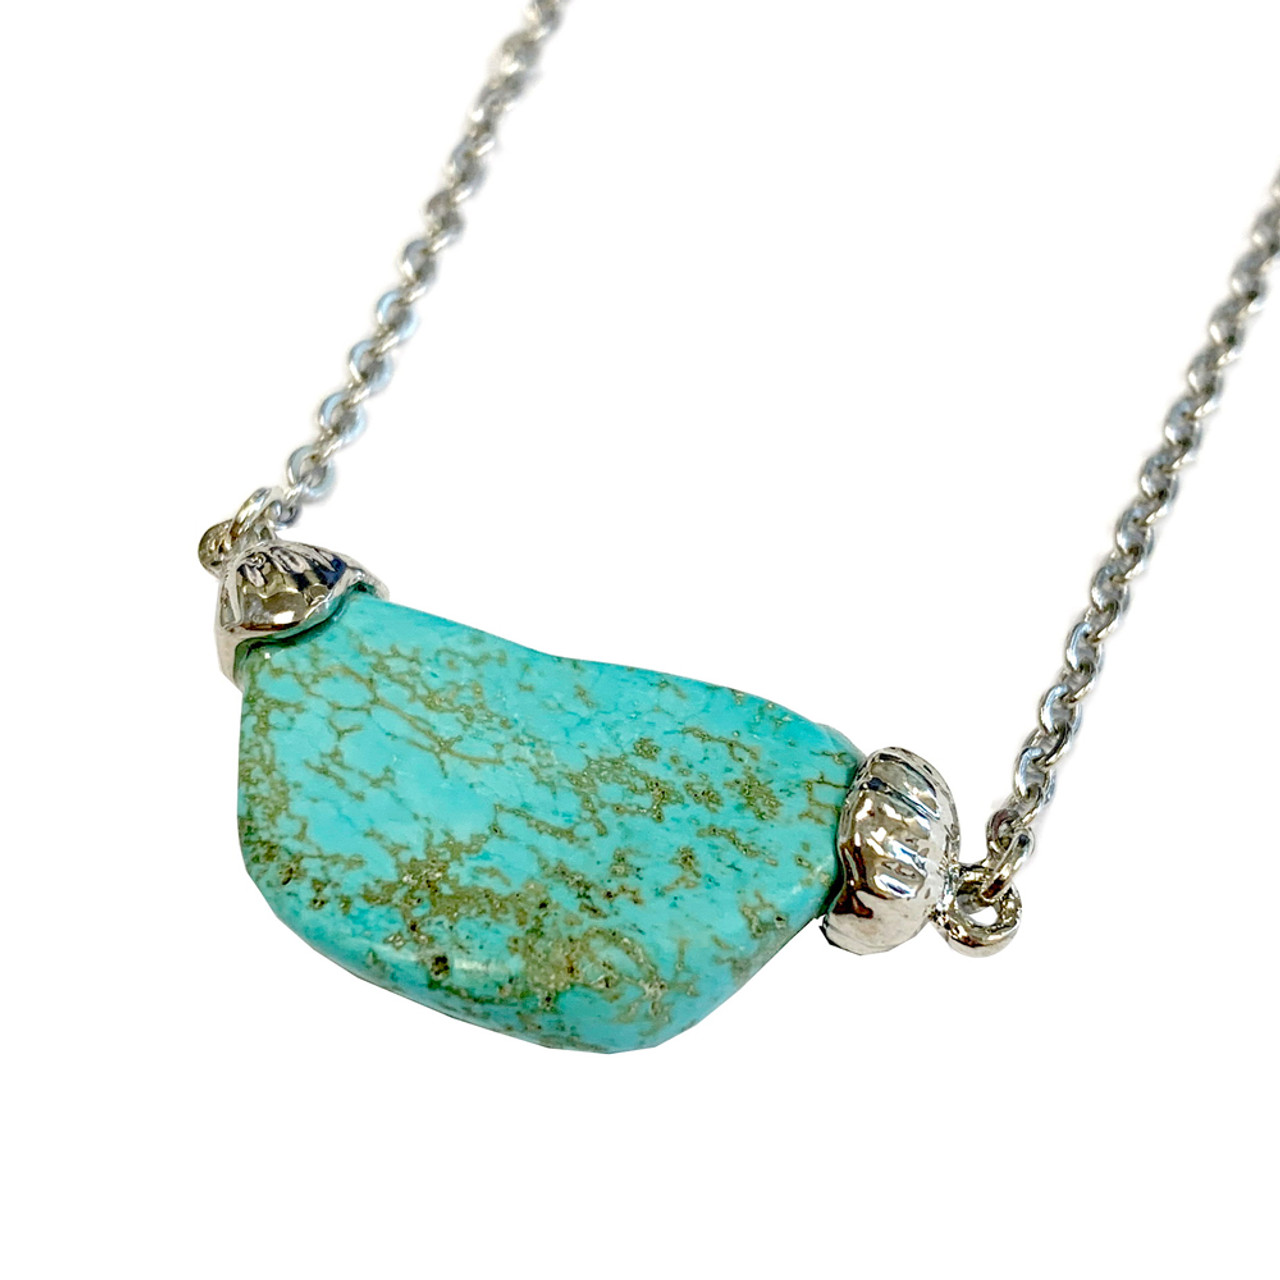 Necklaces and Pendants, Accessories for Women